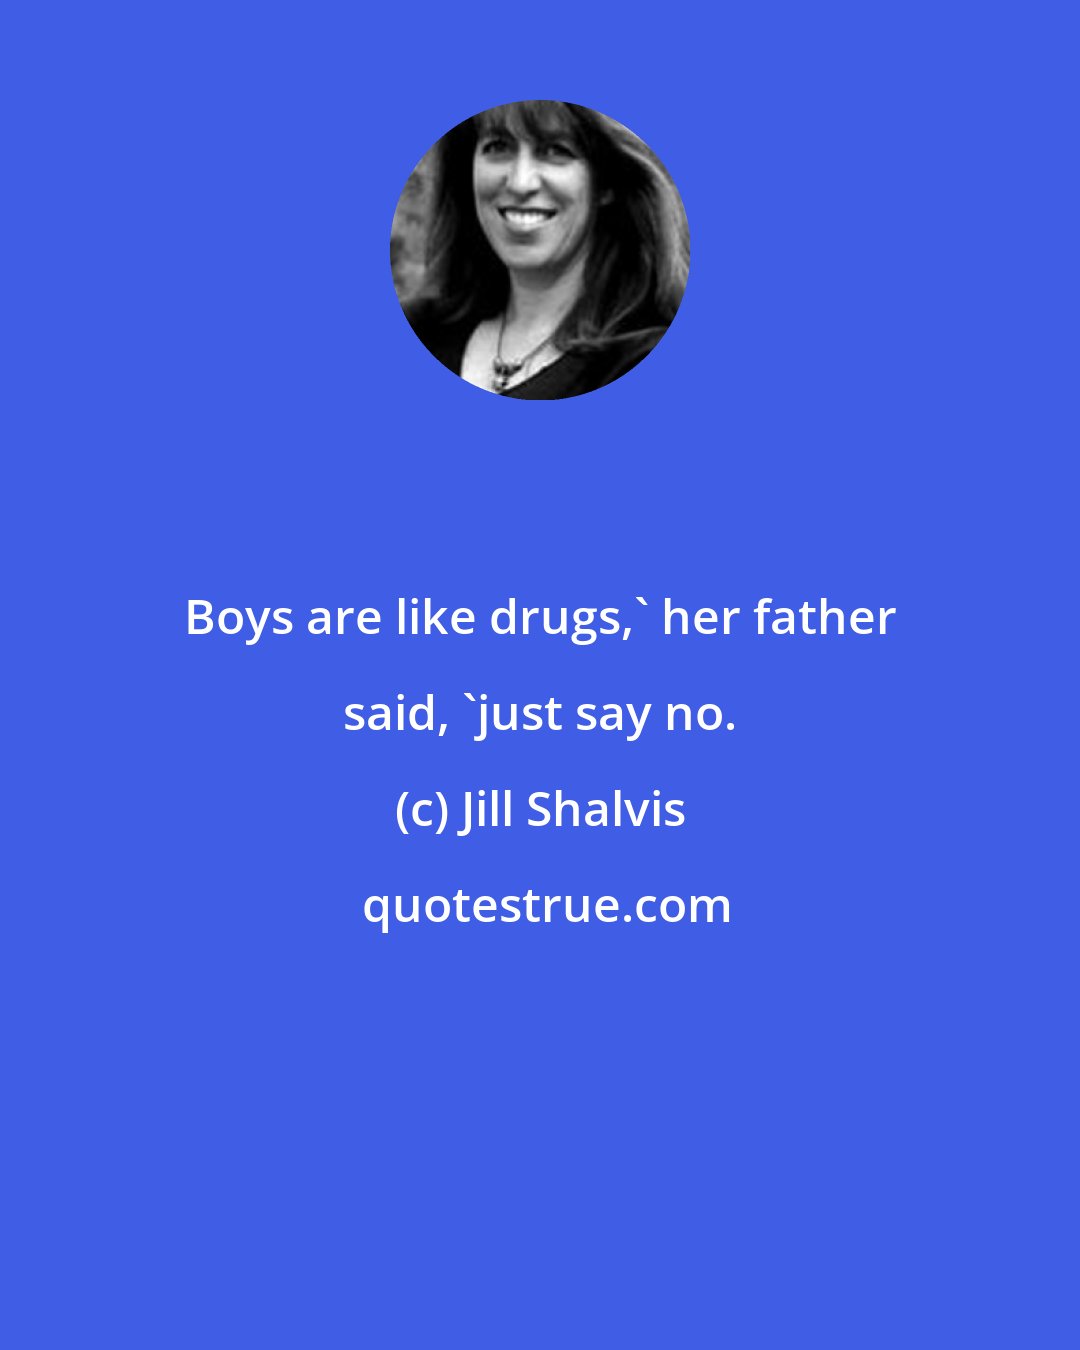 Jill Shalvis: Boys are like drugs,' her father said, 'just say no.